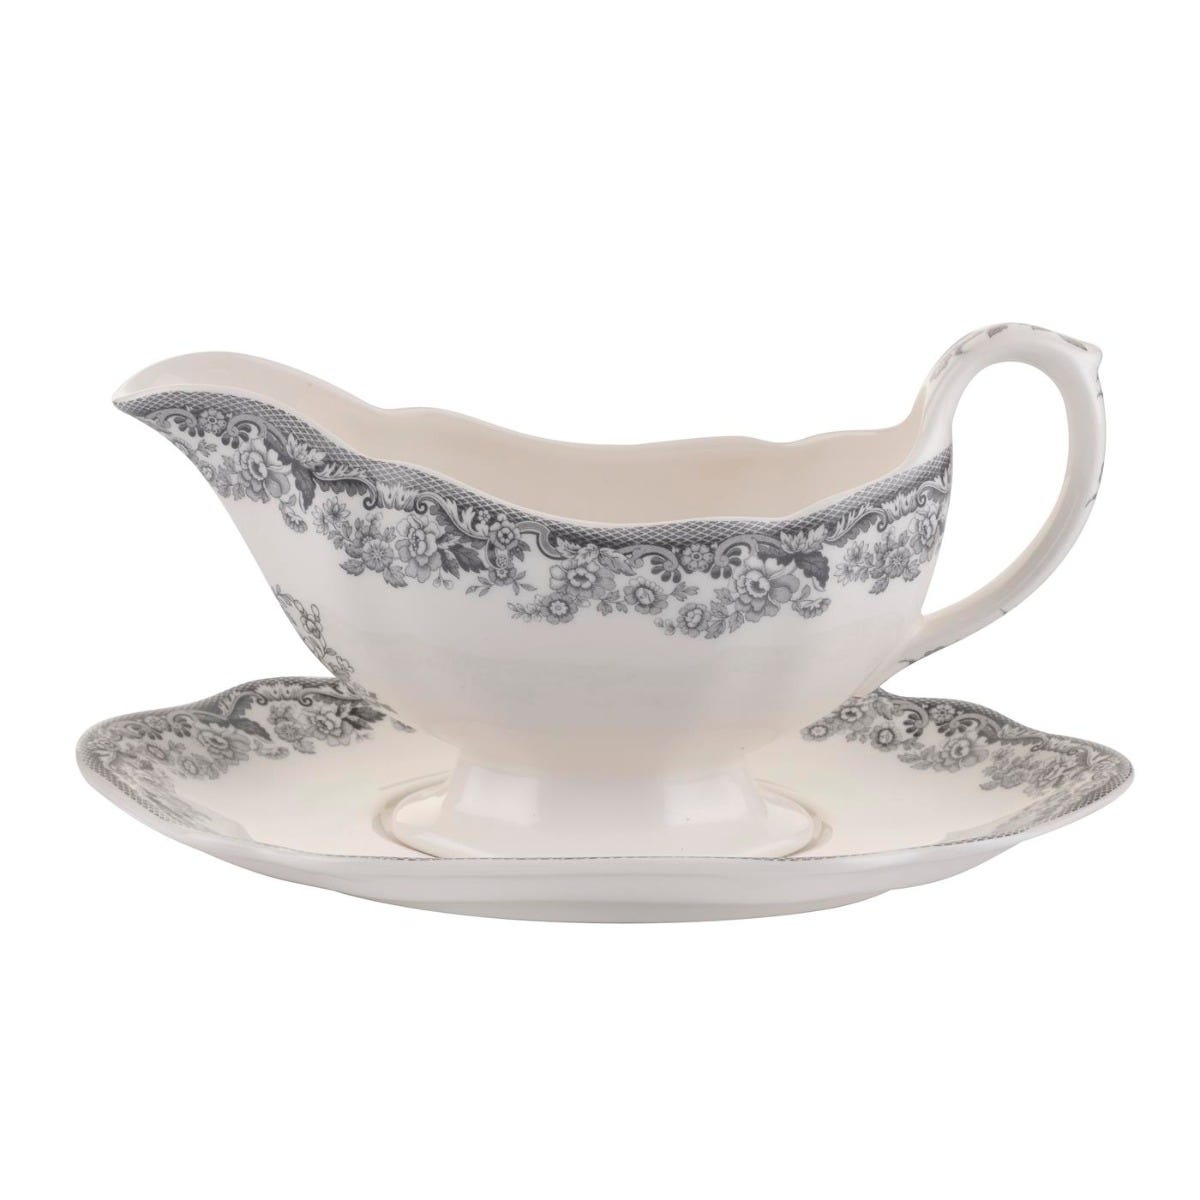 Seconds Spode Delamere Rural Sauce Boat and Stand